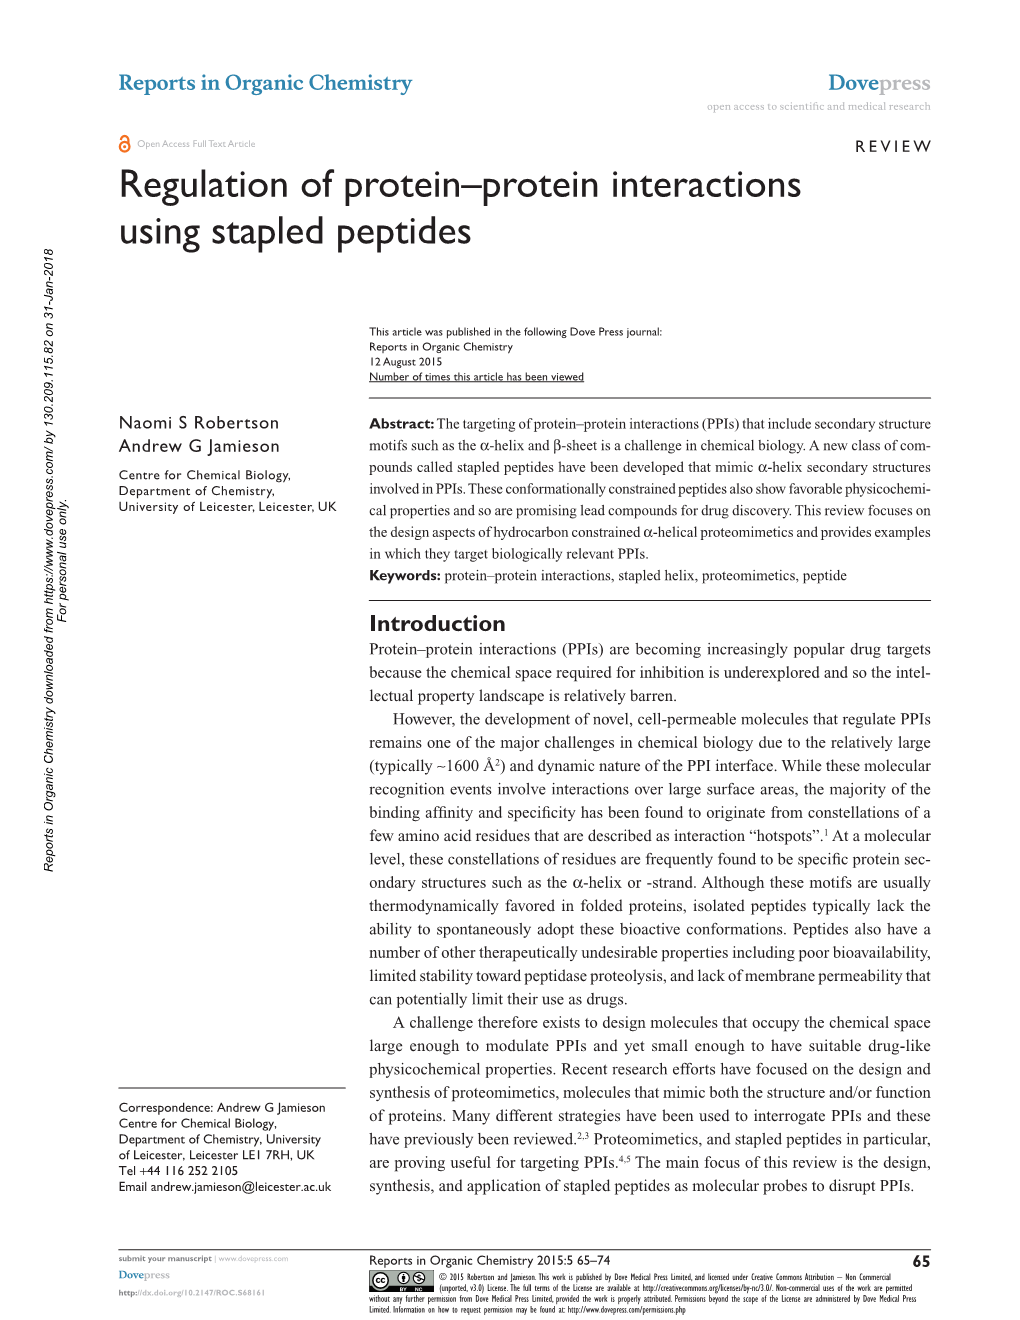 Regulation of Protein–Protein Interactions Using Stapled Peptides